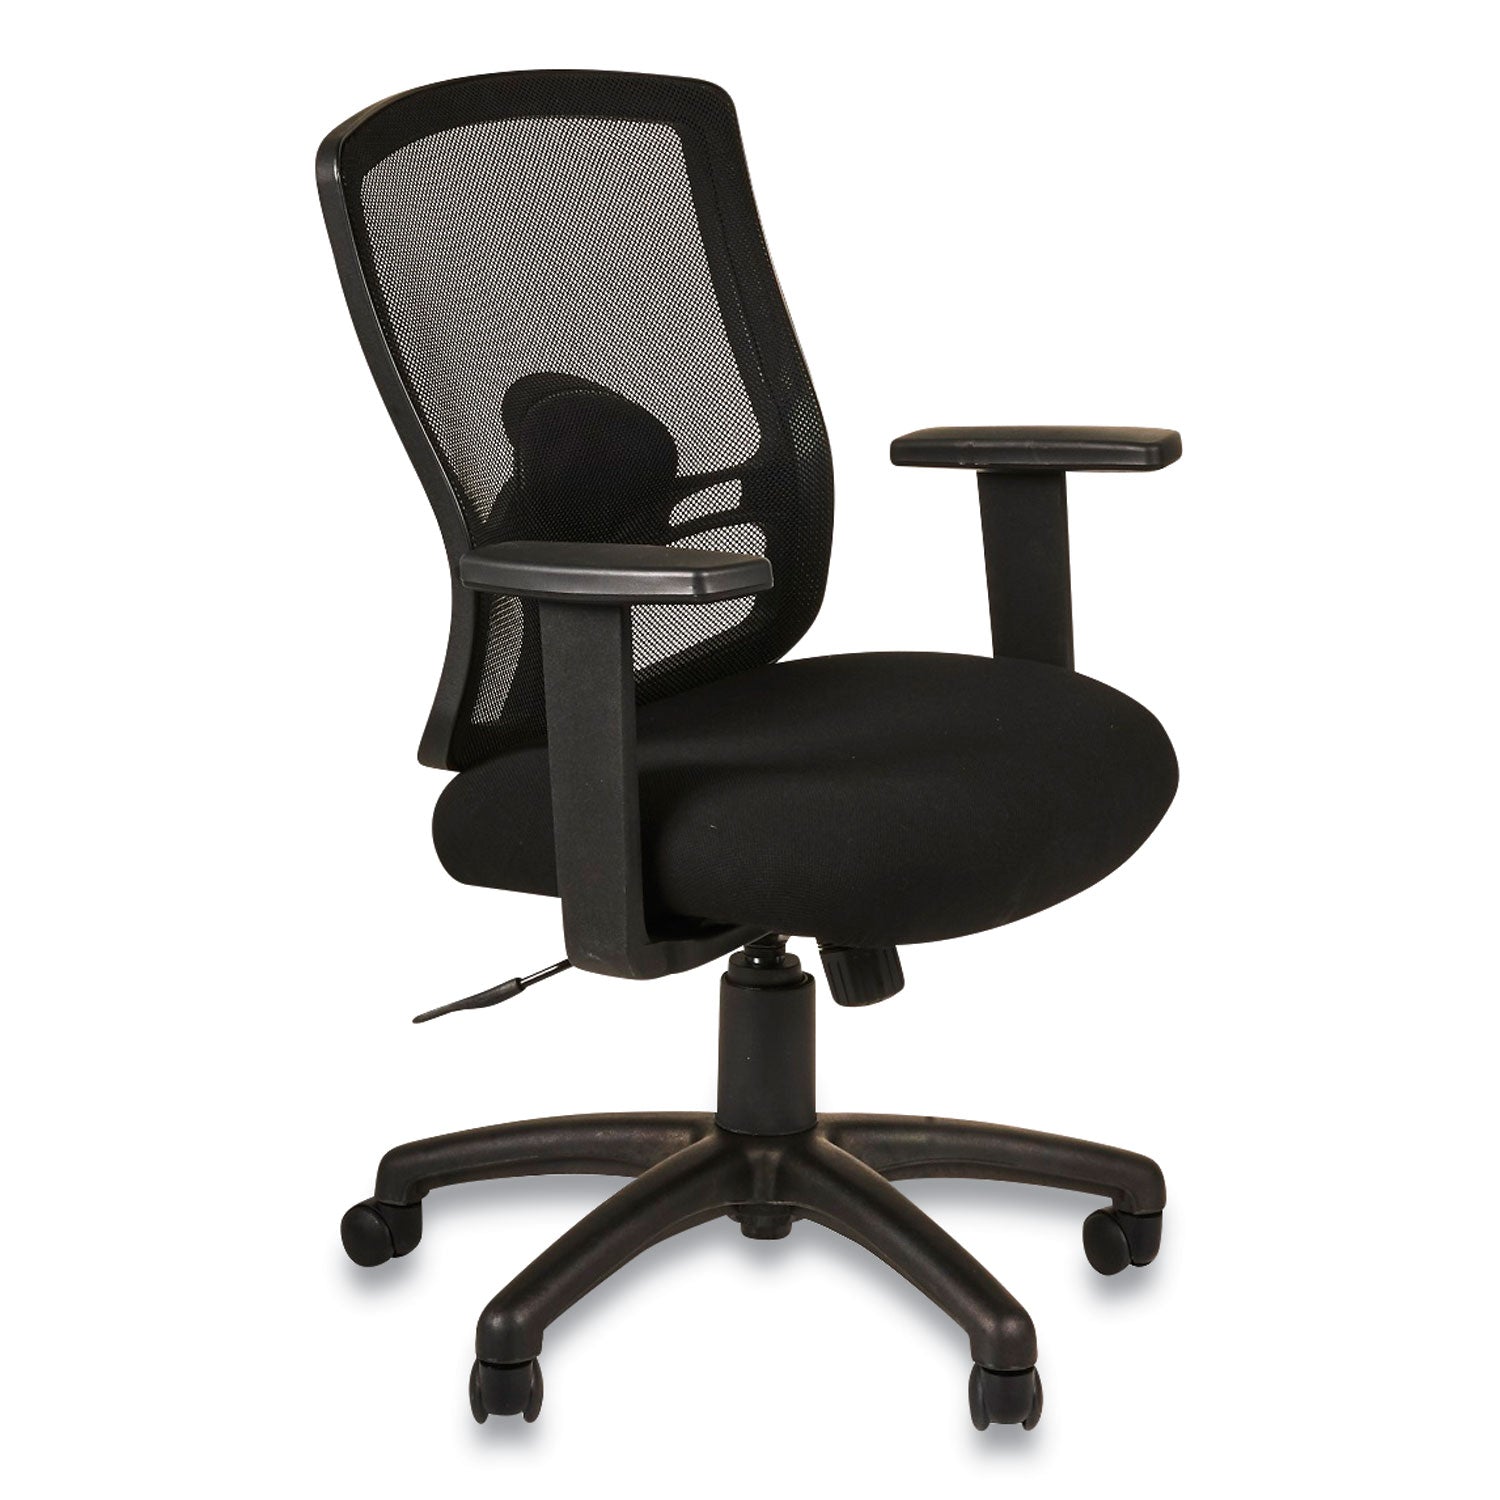 alera-etros-series-mesh-mid-back-petite-swivel-tilt-chair-supports-up-to-275-lb-1771-to-2165-seat-height-black_aleet4017b - 1